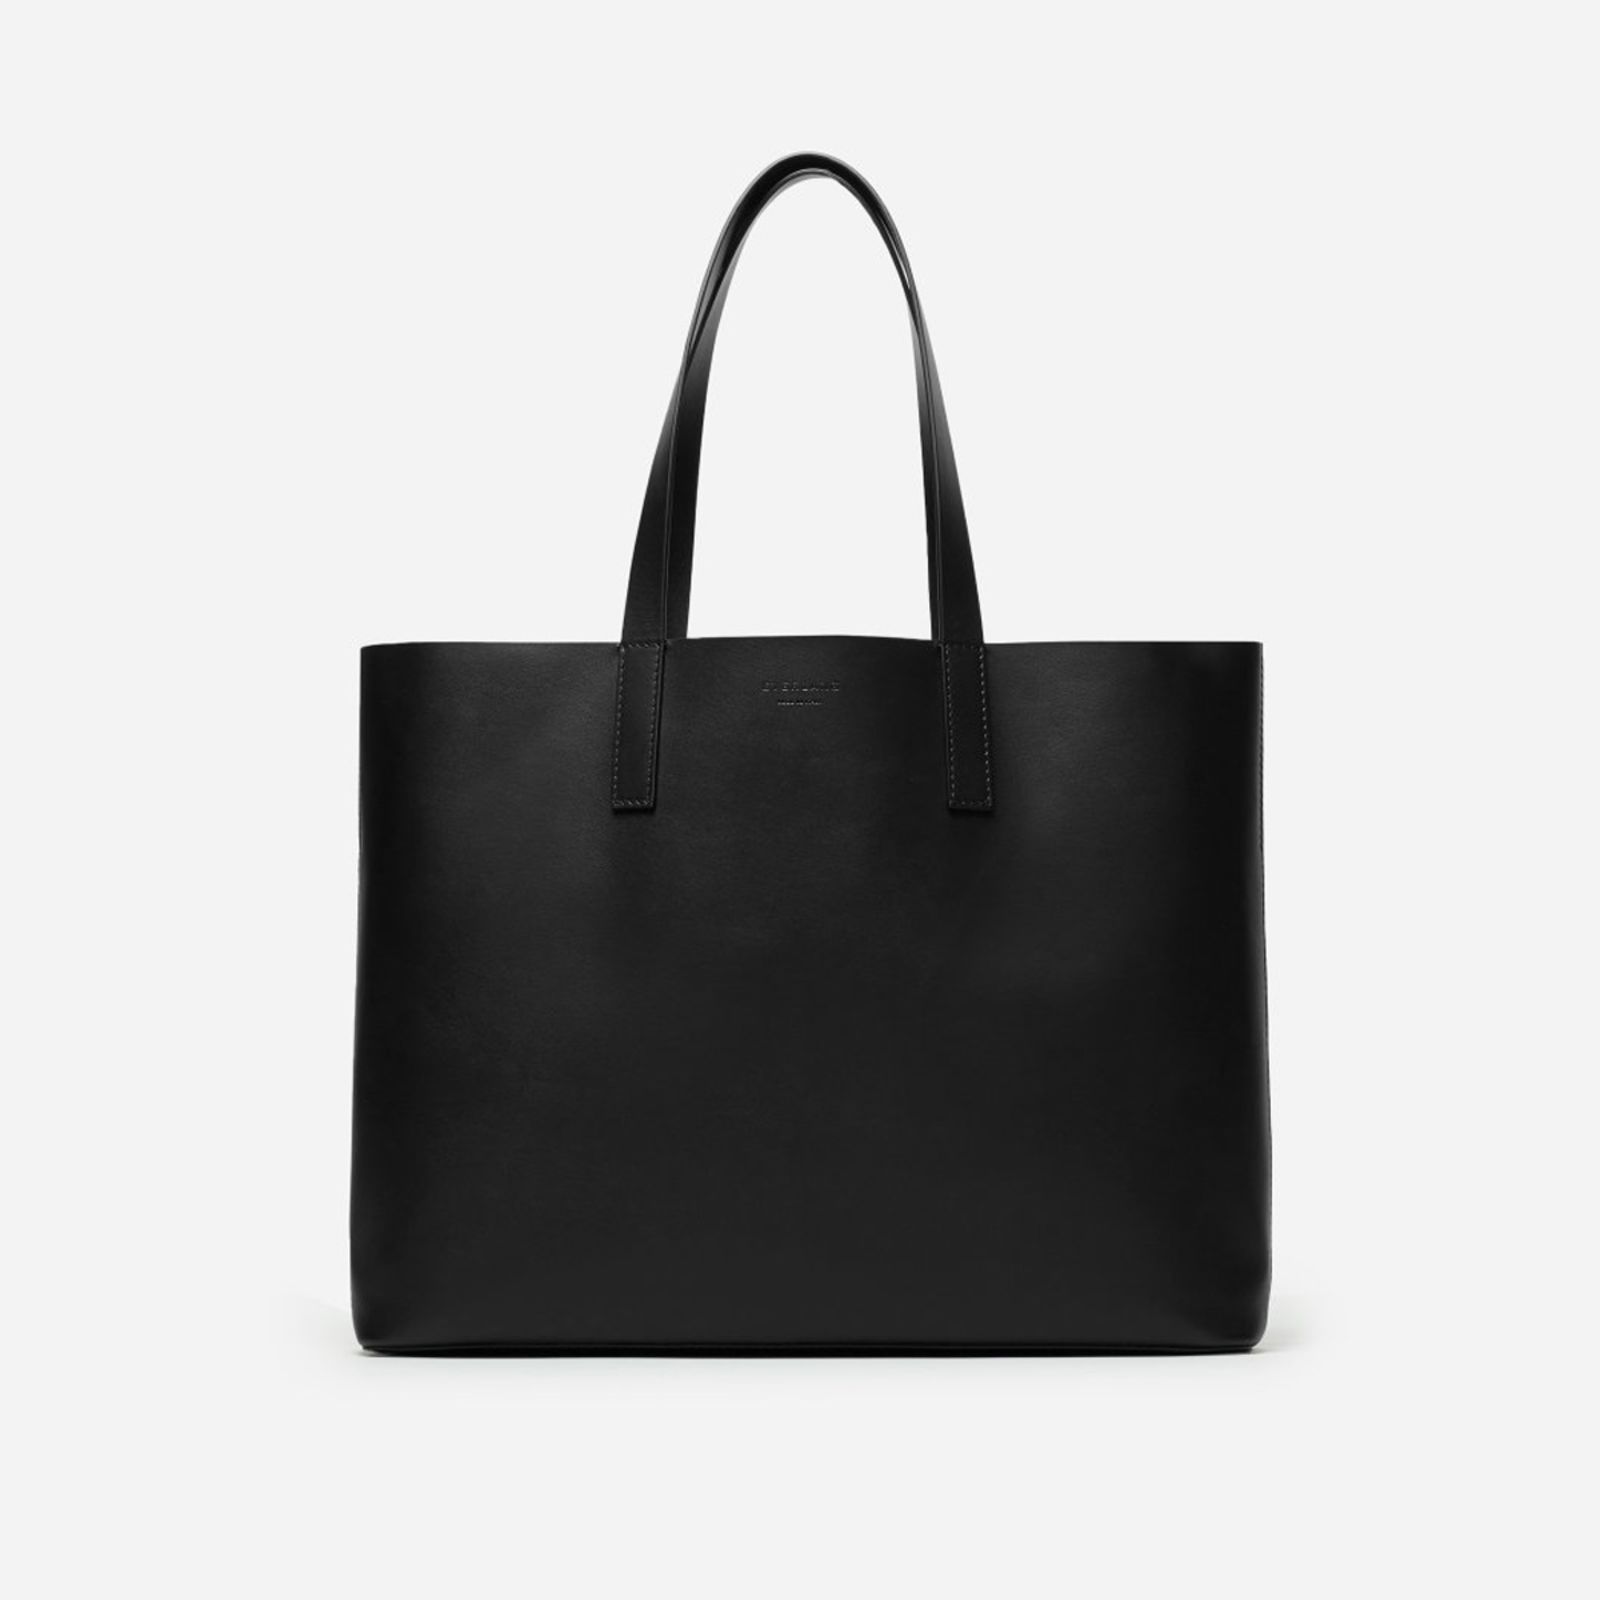 Women's Leather Market Tote Bag by Everlane in Black | Everlane